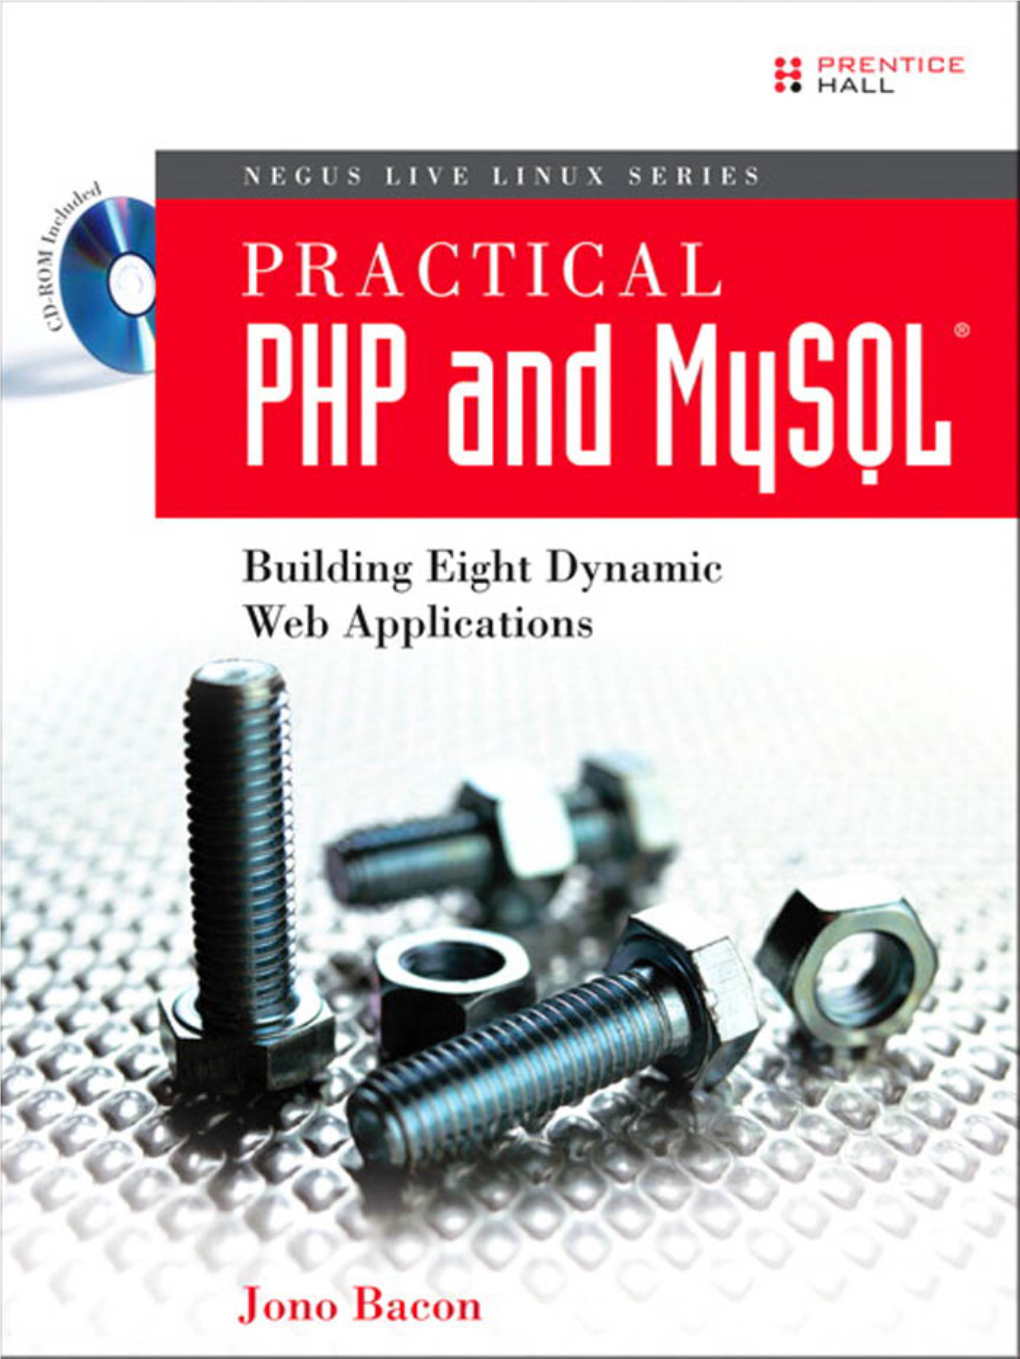 Practical PHP and Mysql® NEGUS LIVE LINUX SERIES